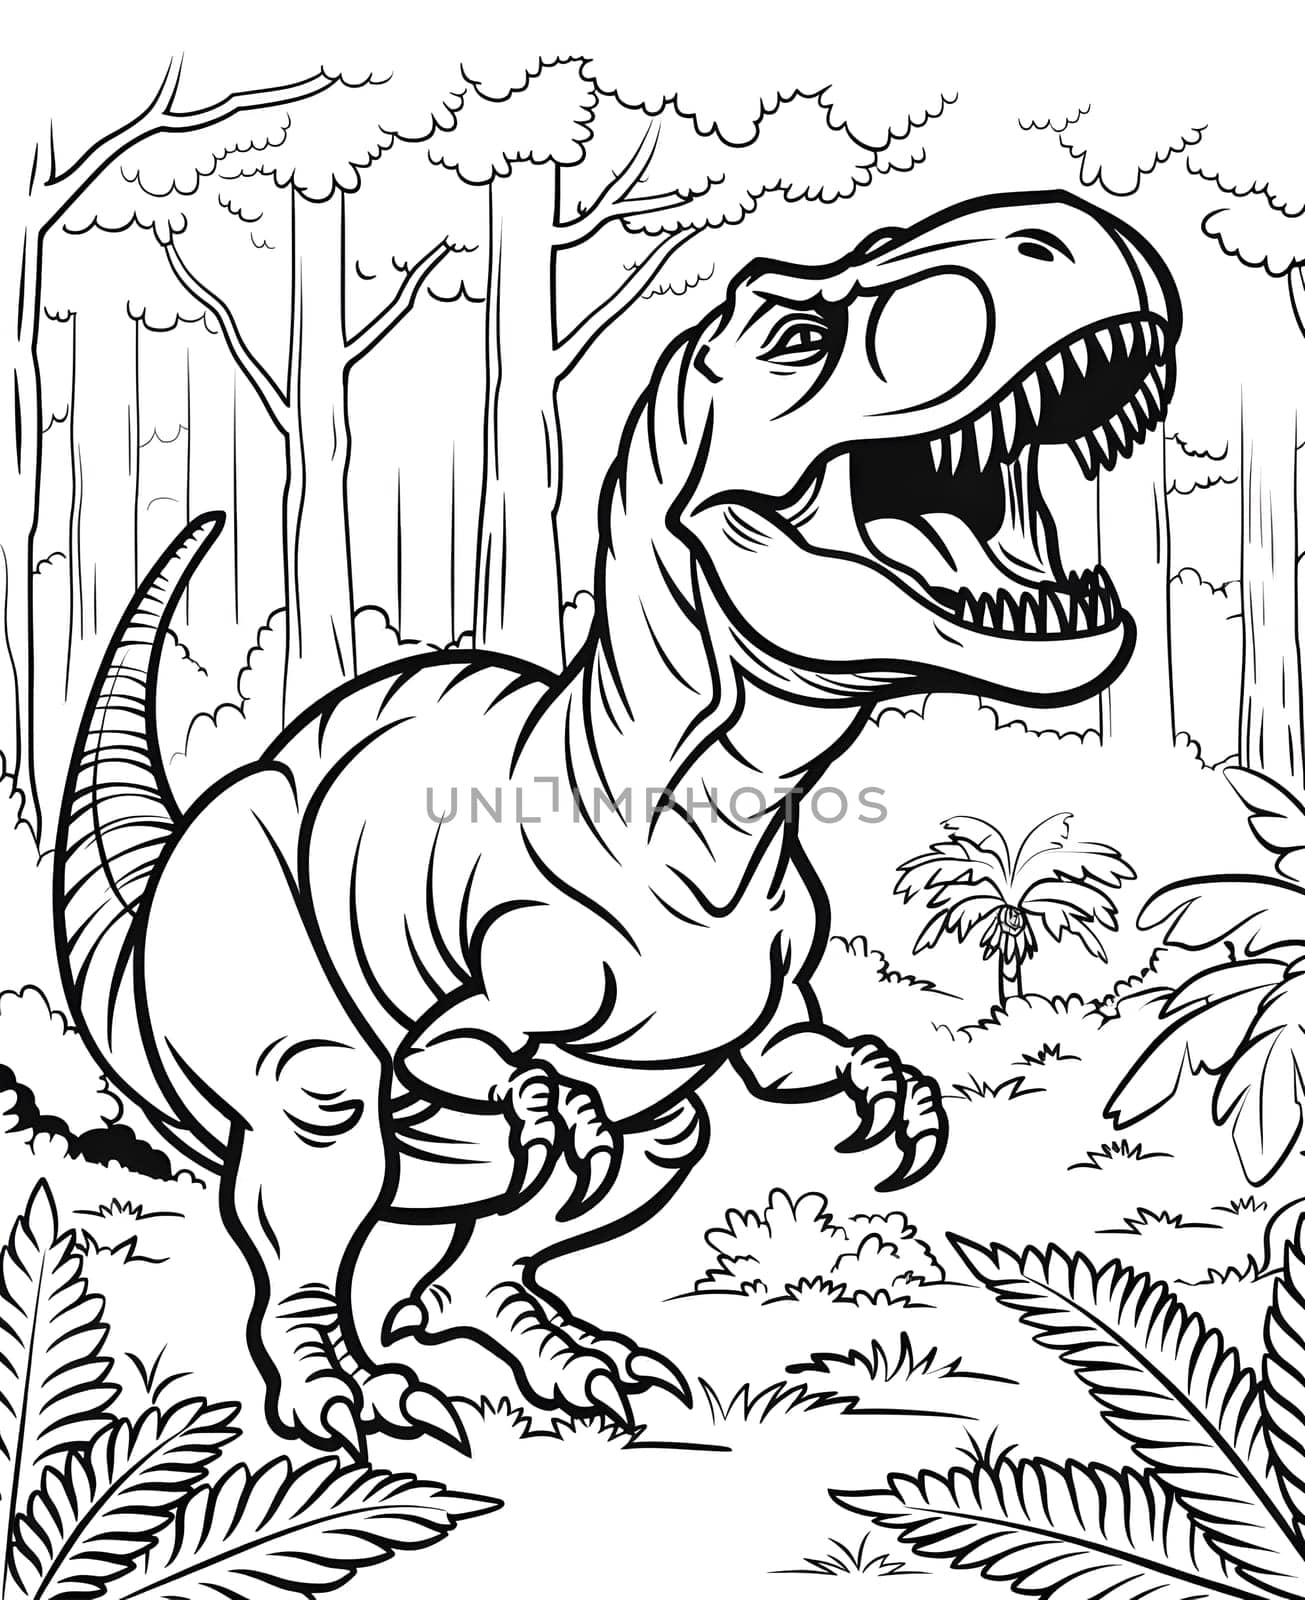 Cartoon illustration of a Trex dinosaur in a jungle, black and white drawing by Nadtochiy